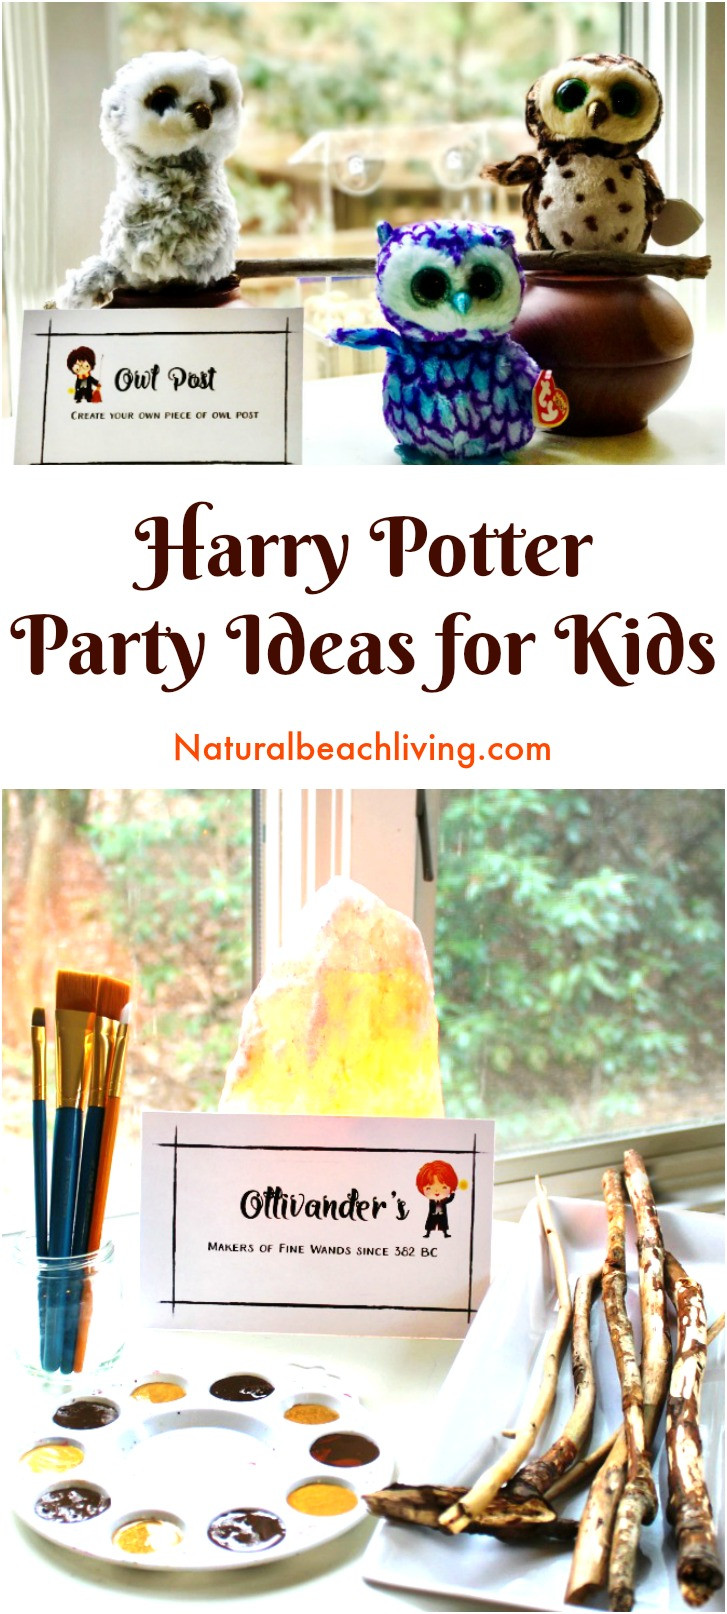 Harry Potter Birthday Decorations
 The Best Harry Potter Party Ideas and Printables for Kids